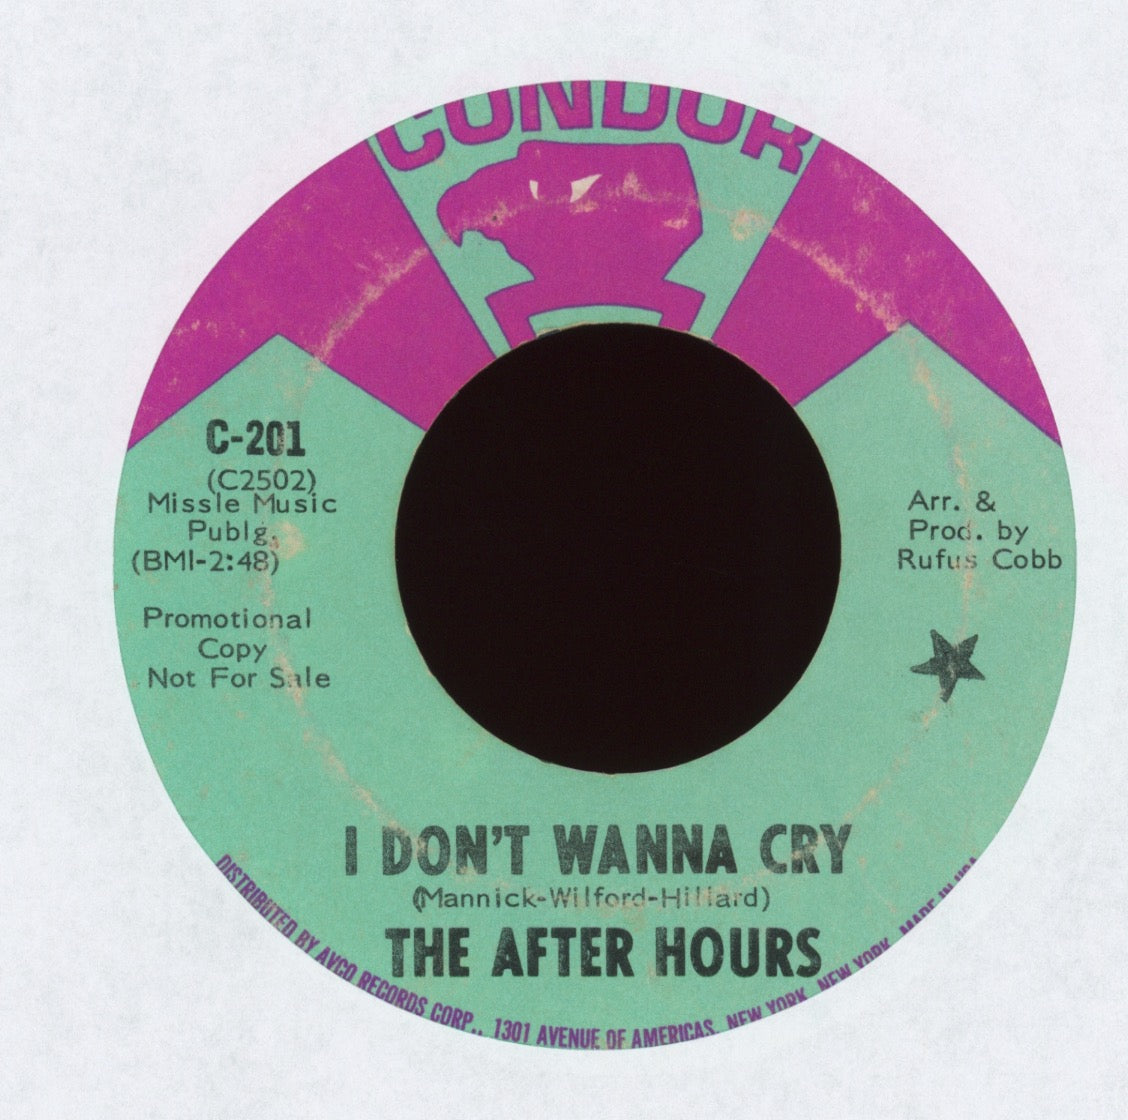 The After Hours - I Don't Wanna Cry on Condor Promo